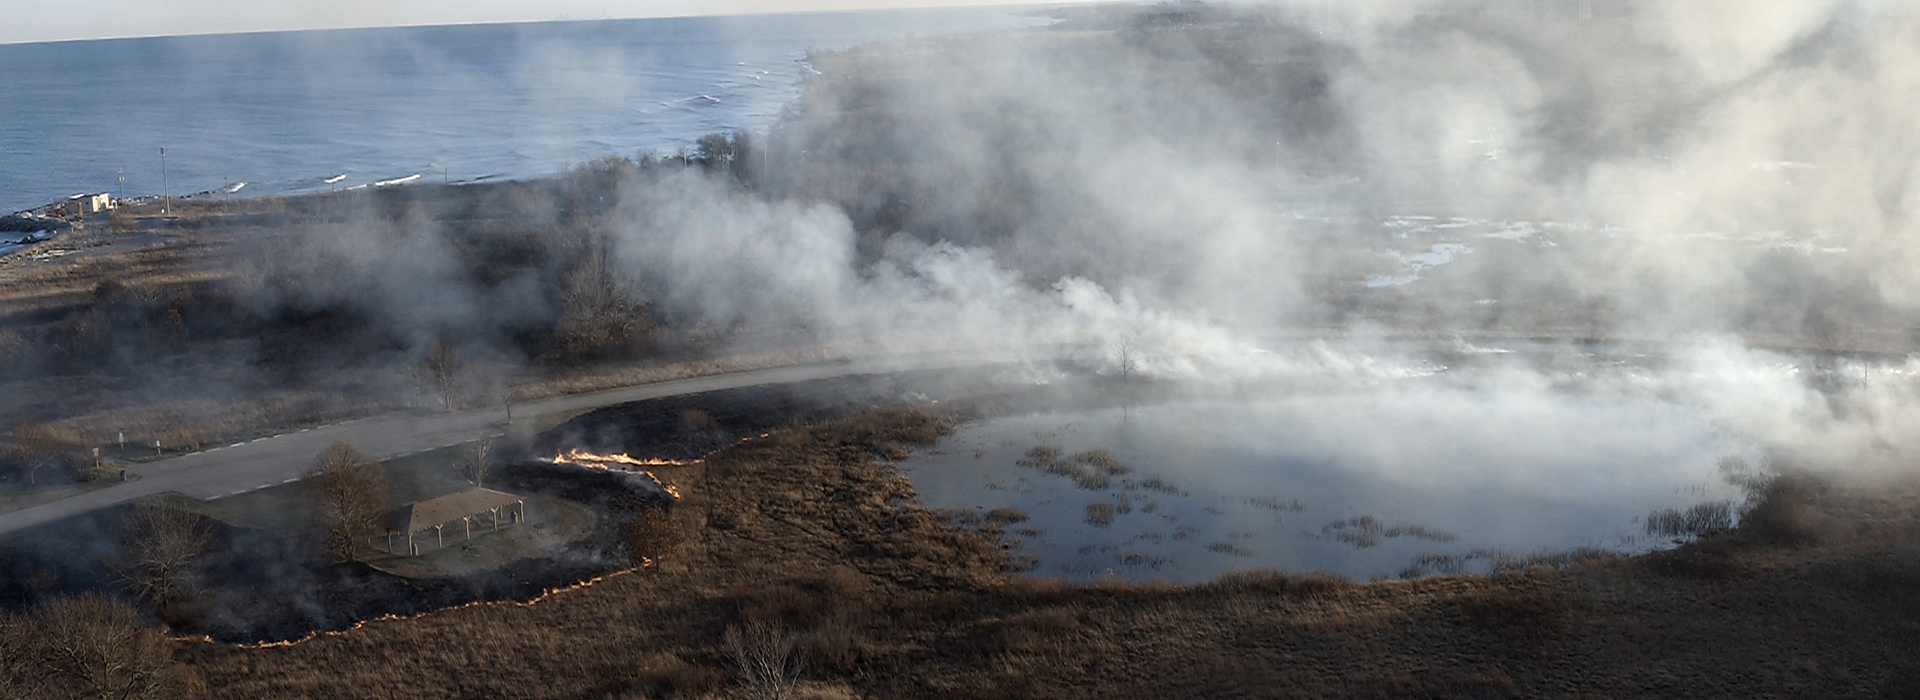 Drone Arrival at controlled fire at Illinois state park